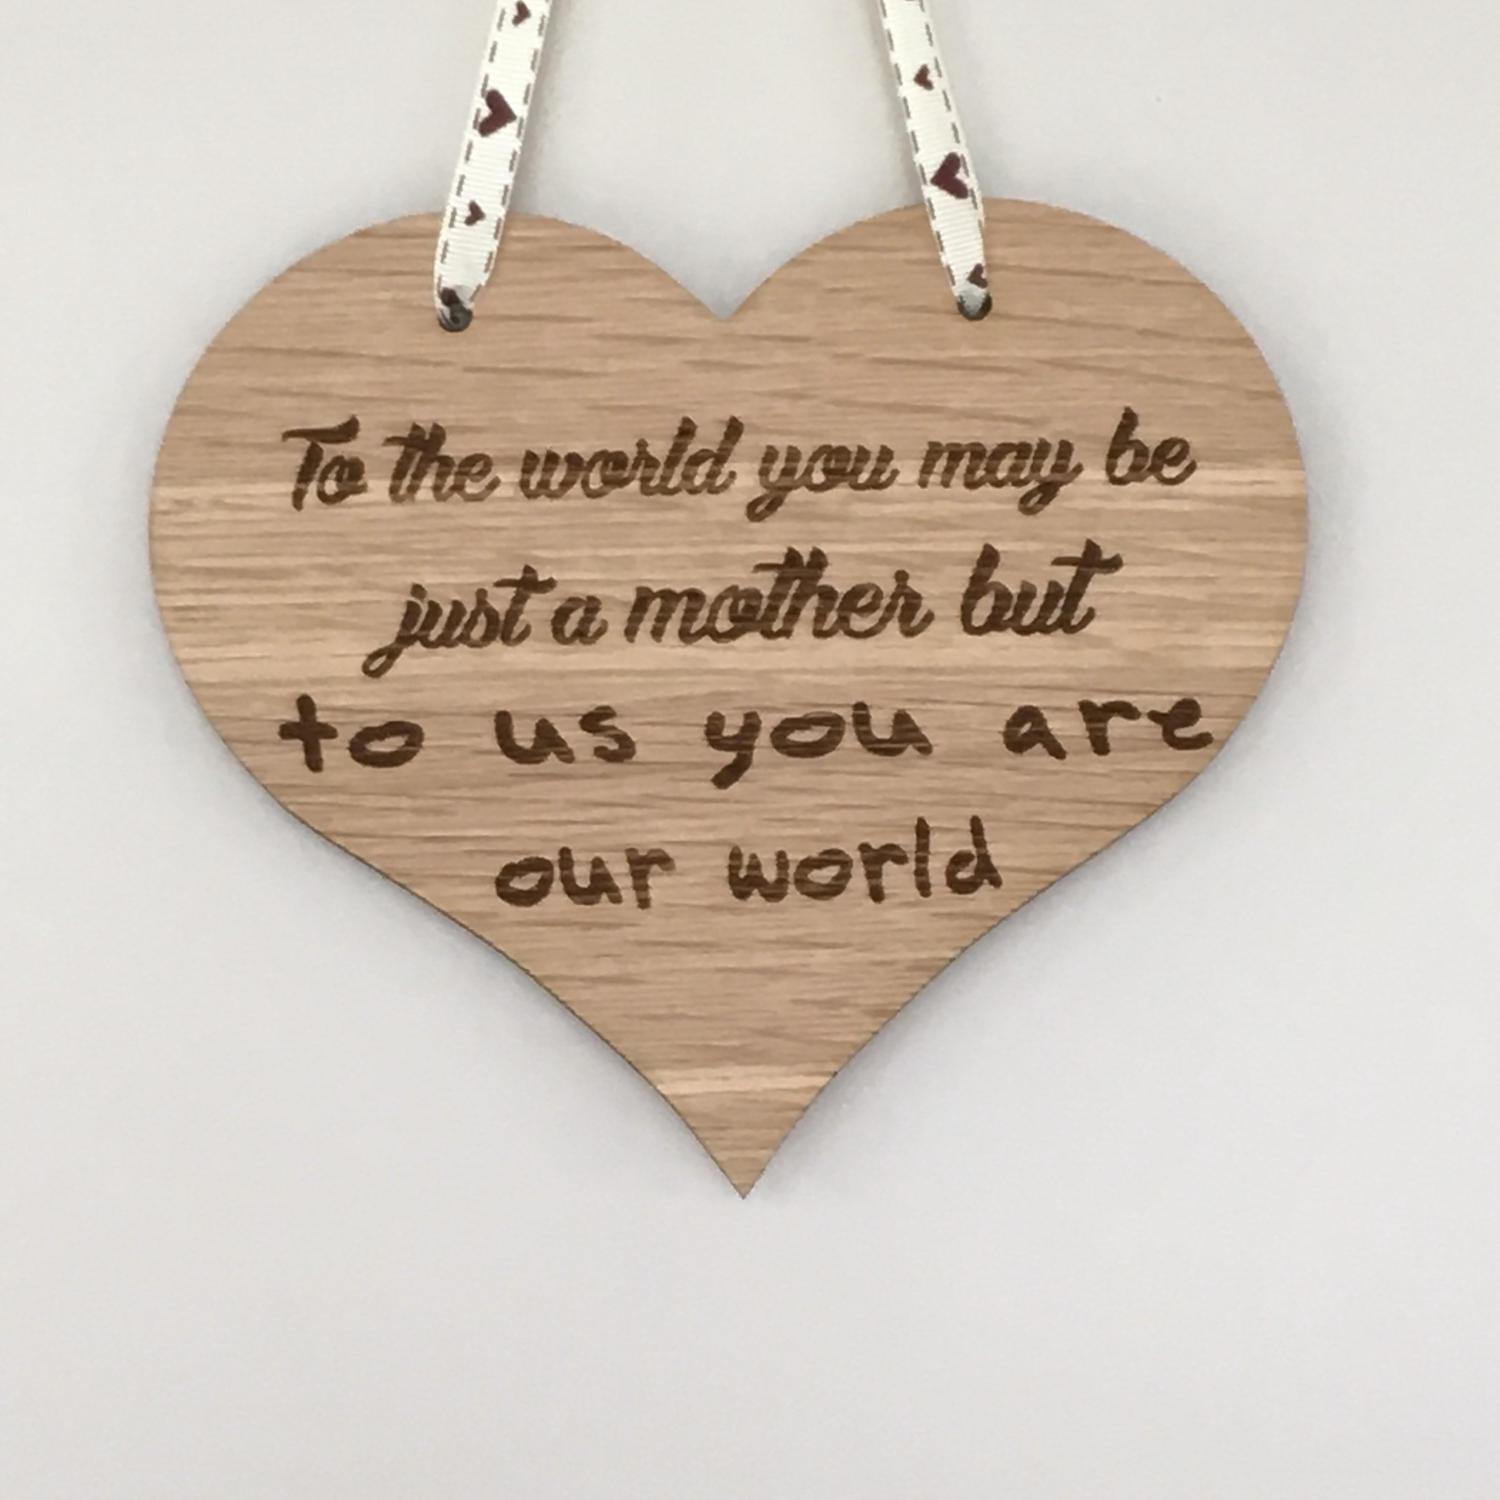 Engraved wooden heart Mother's Day